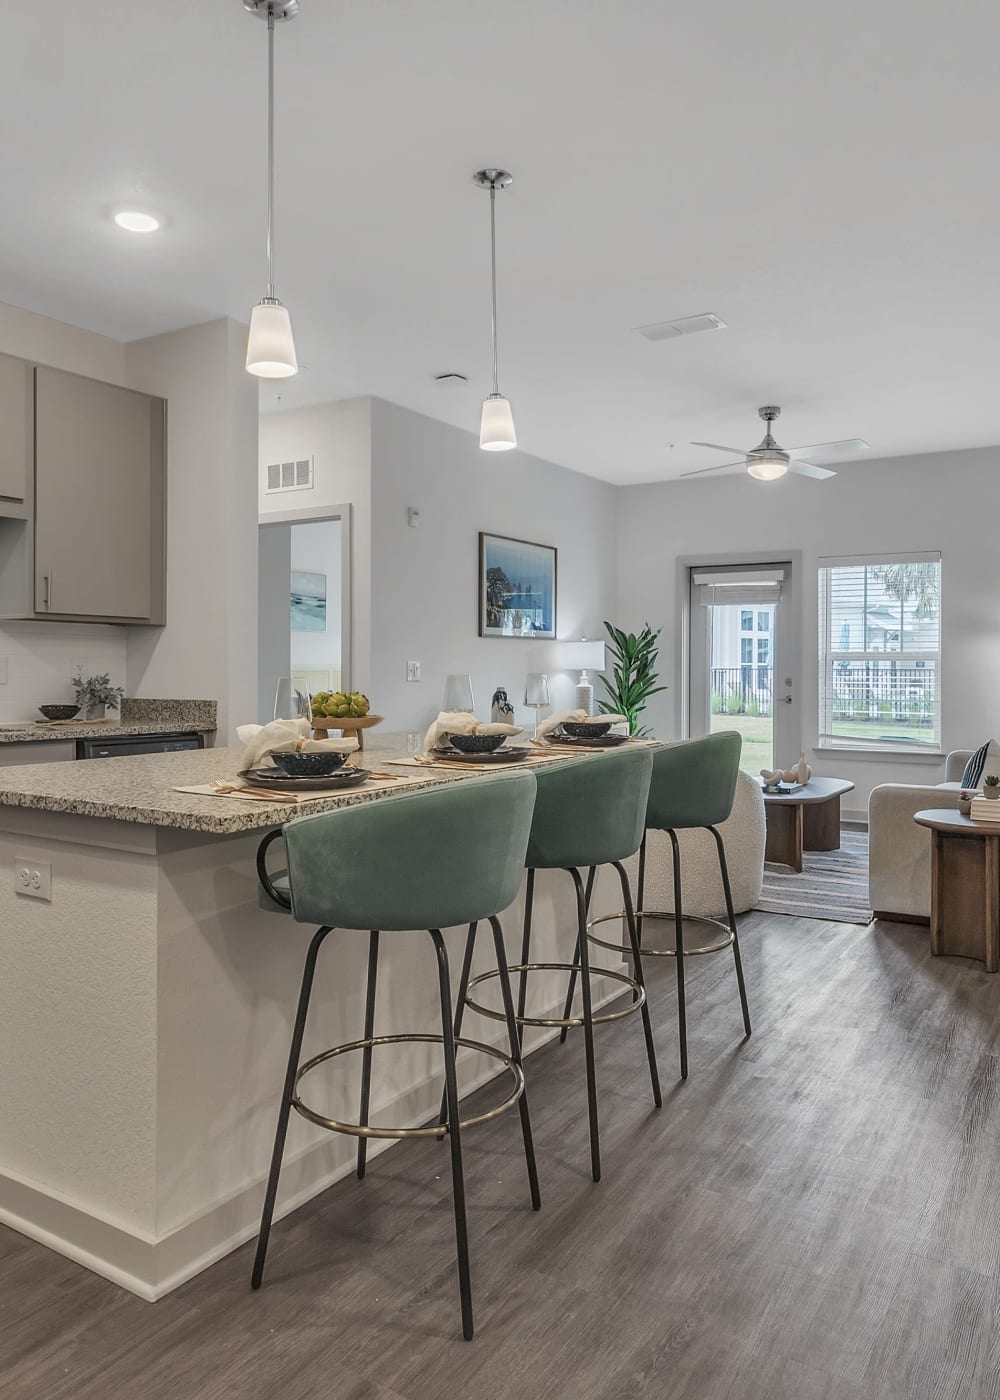 An apartment kitchen island with bar seating at Avocet at Melbourne in Melbourne, Florida